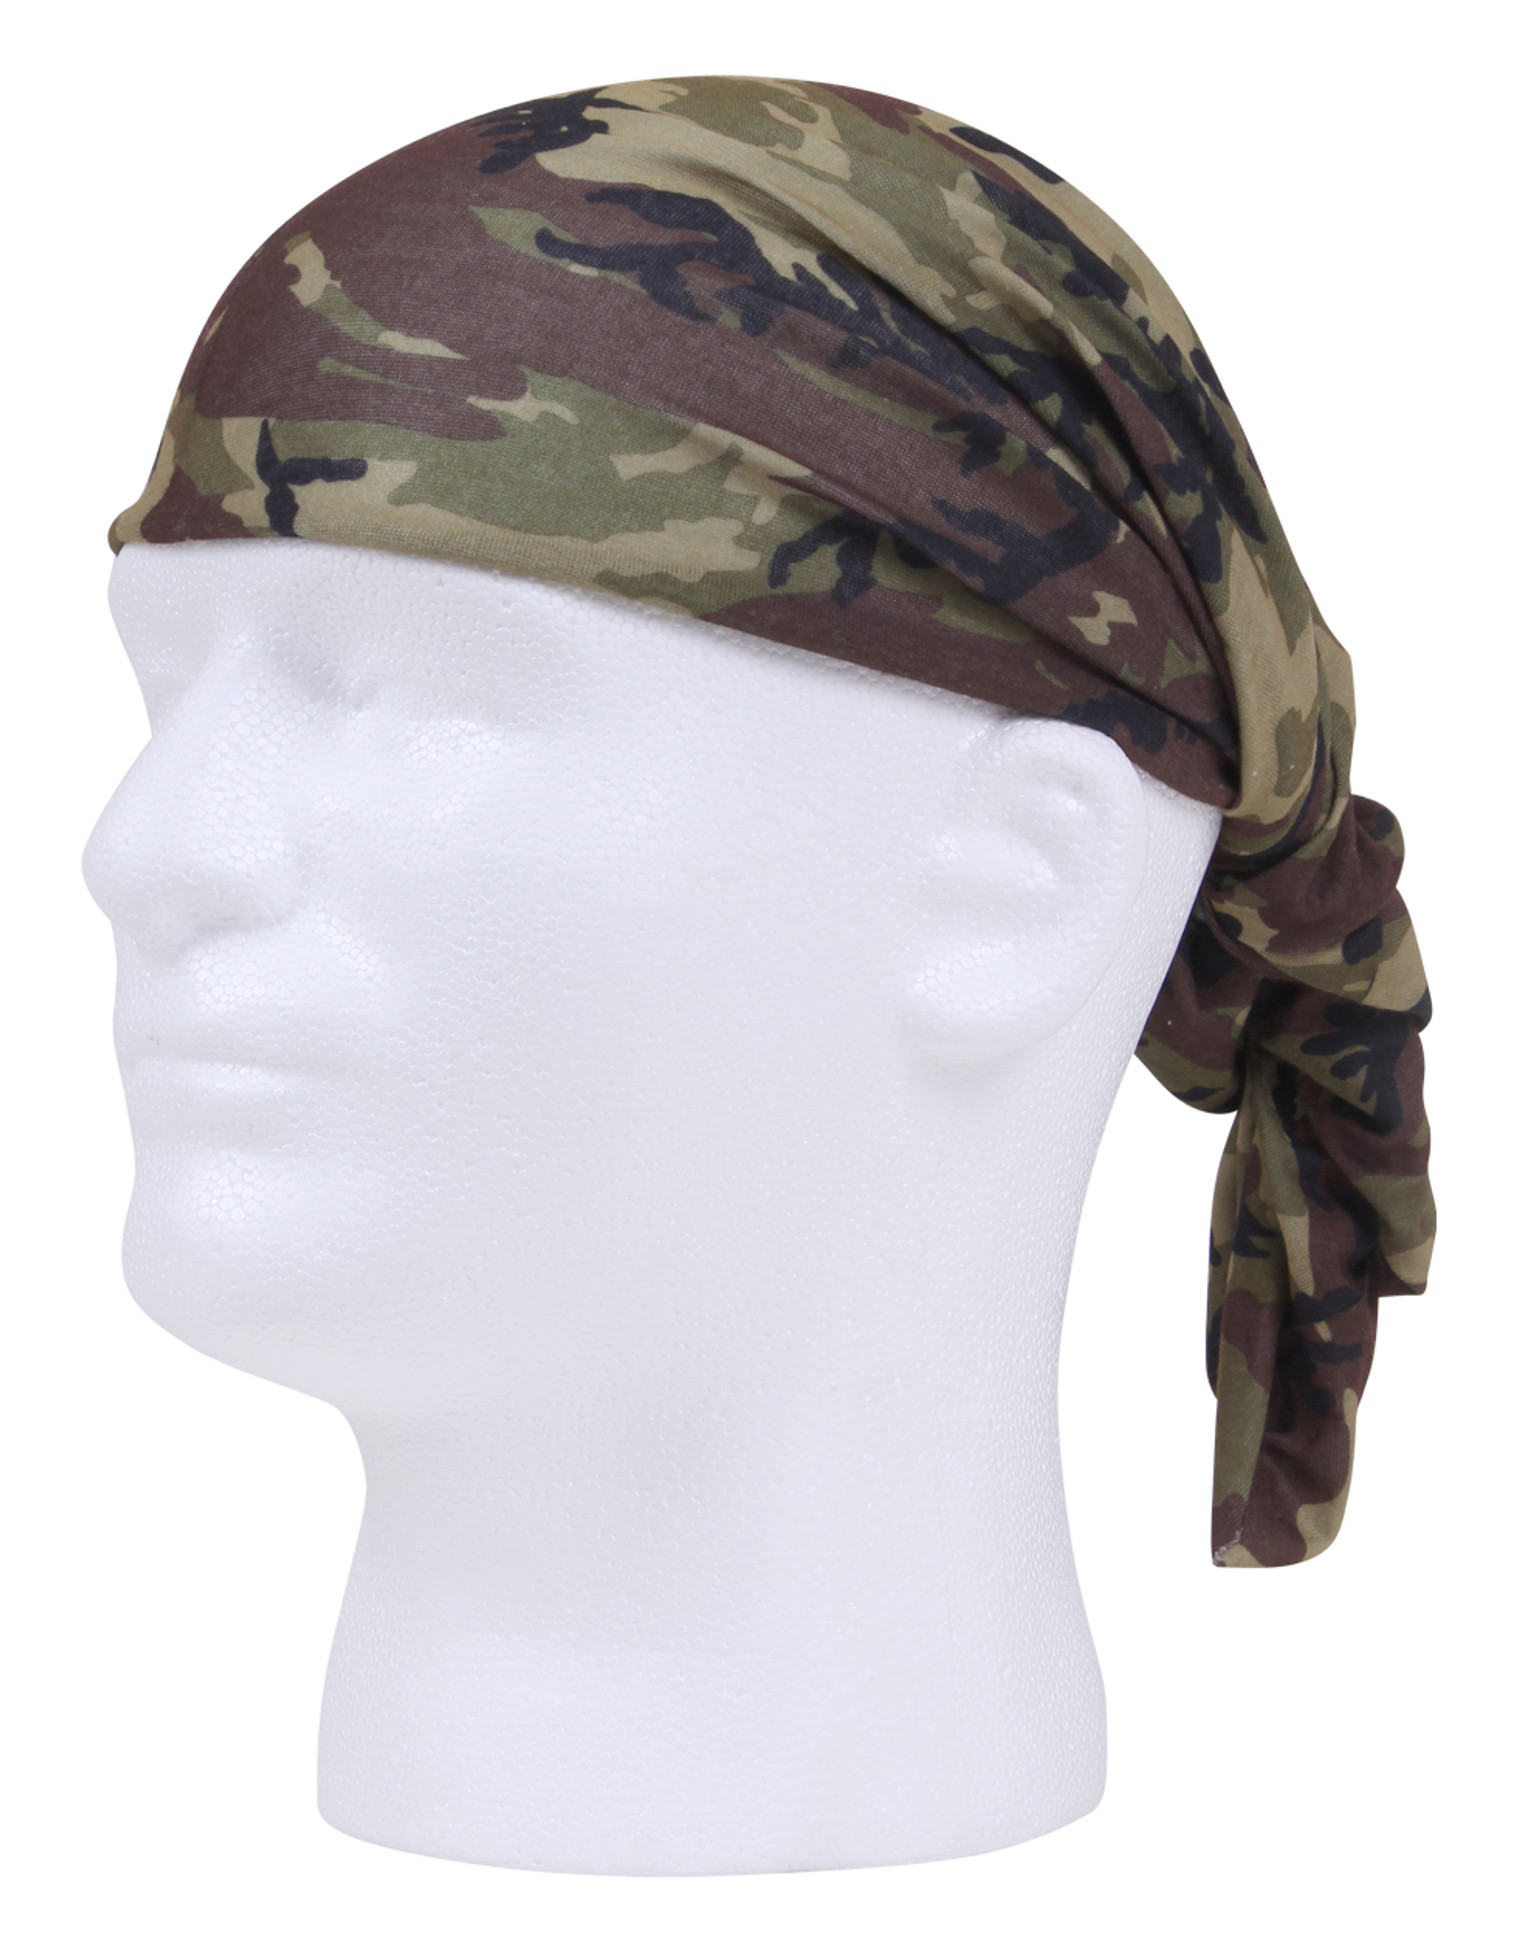 Rothco Multi-Use Neck Gaiter and Face Covering Tactical Wrap - Woodland Camo